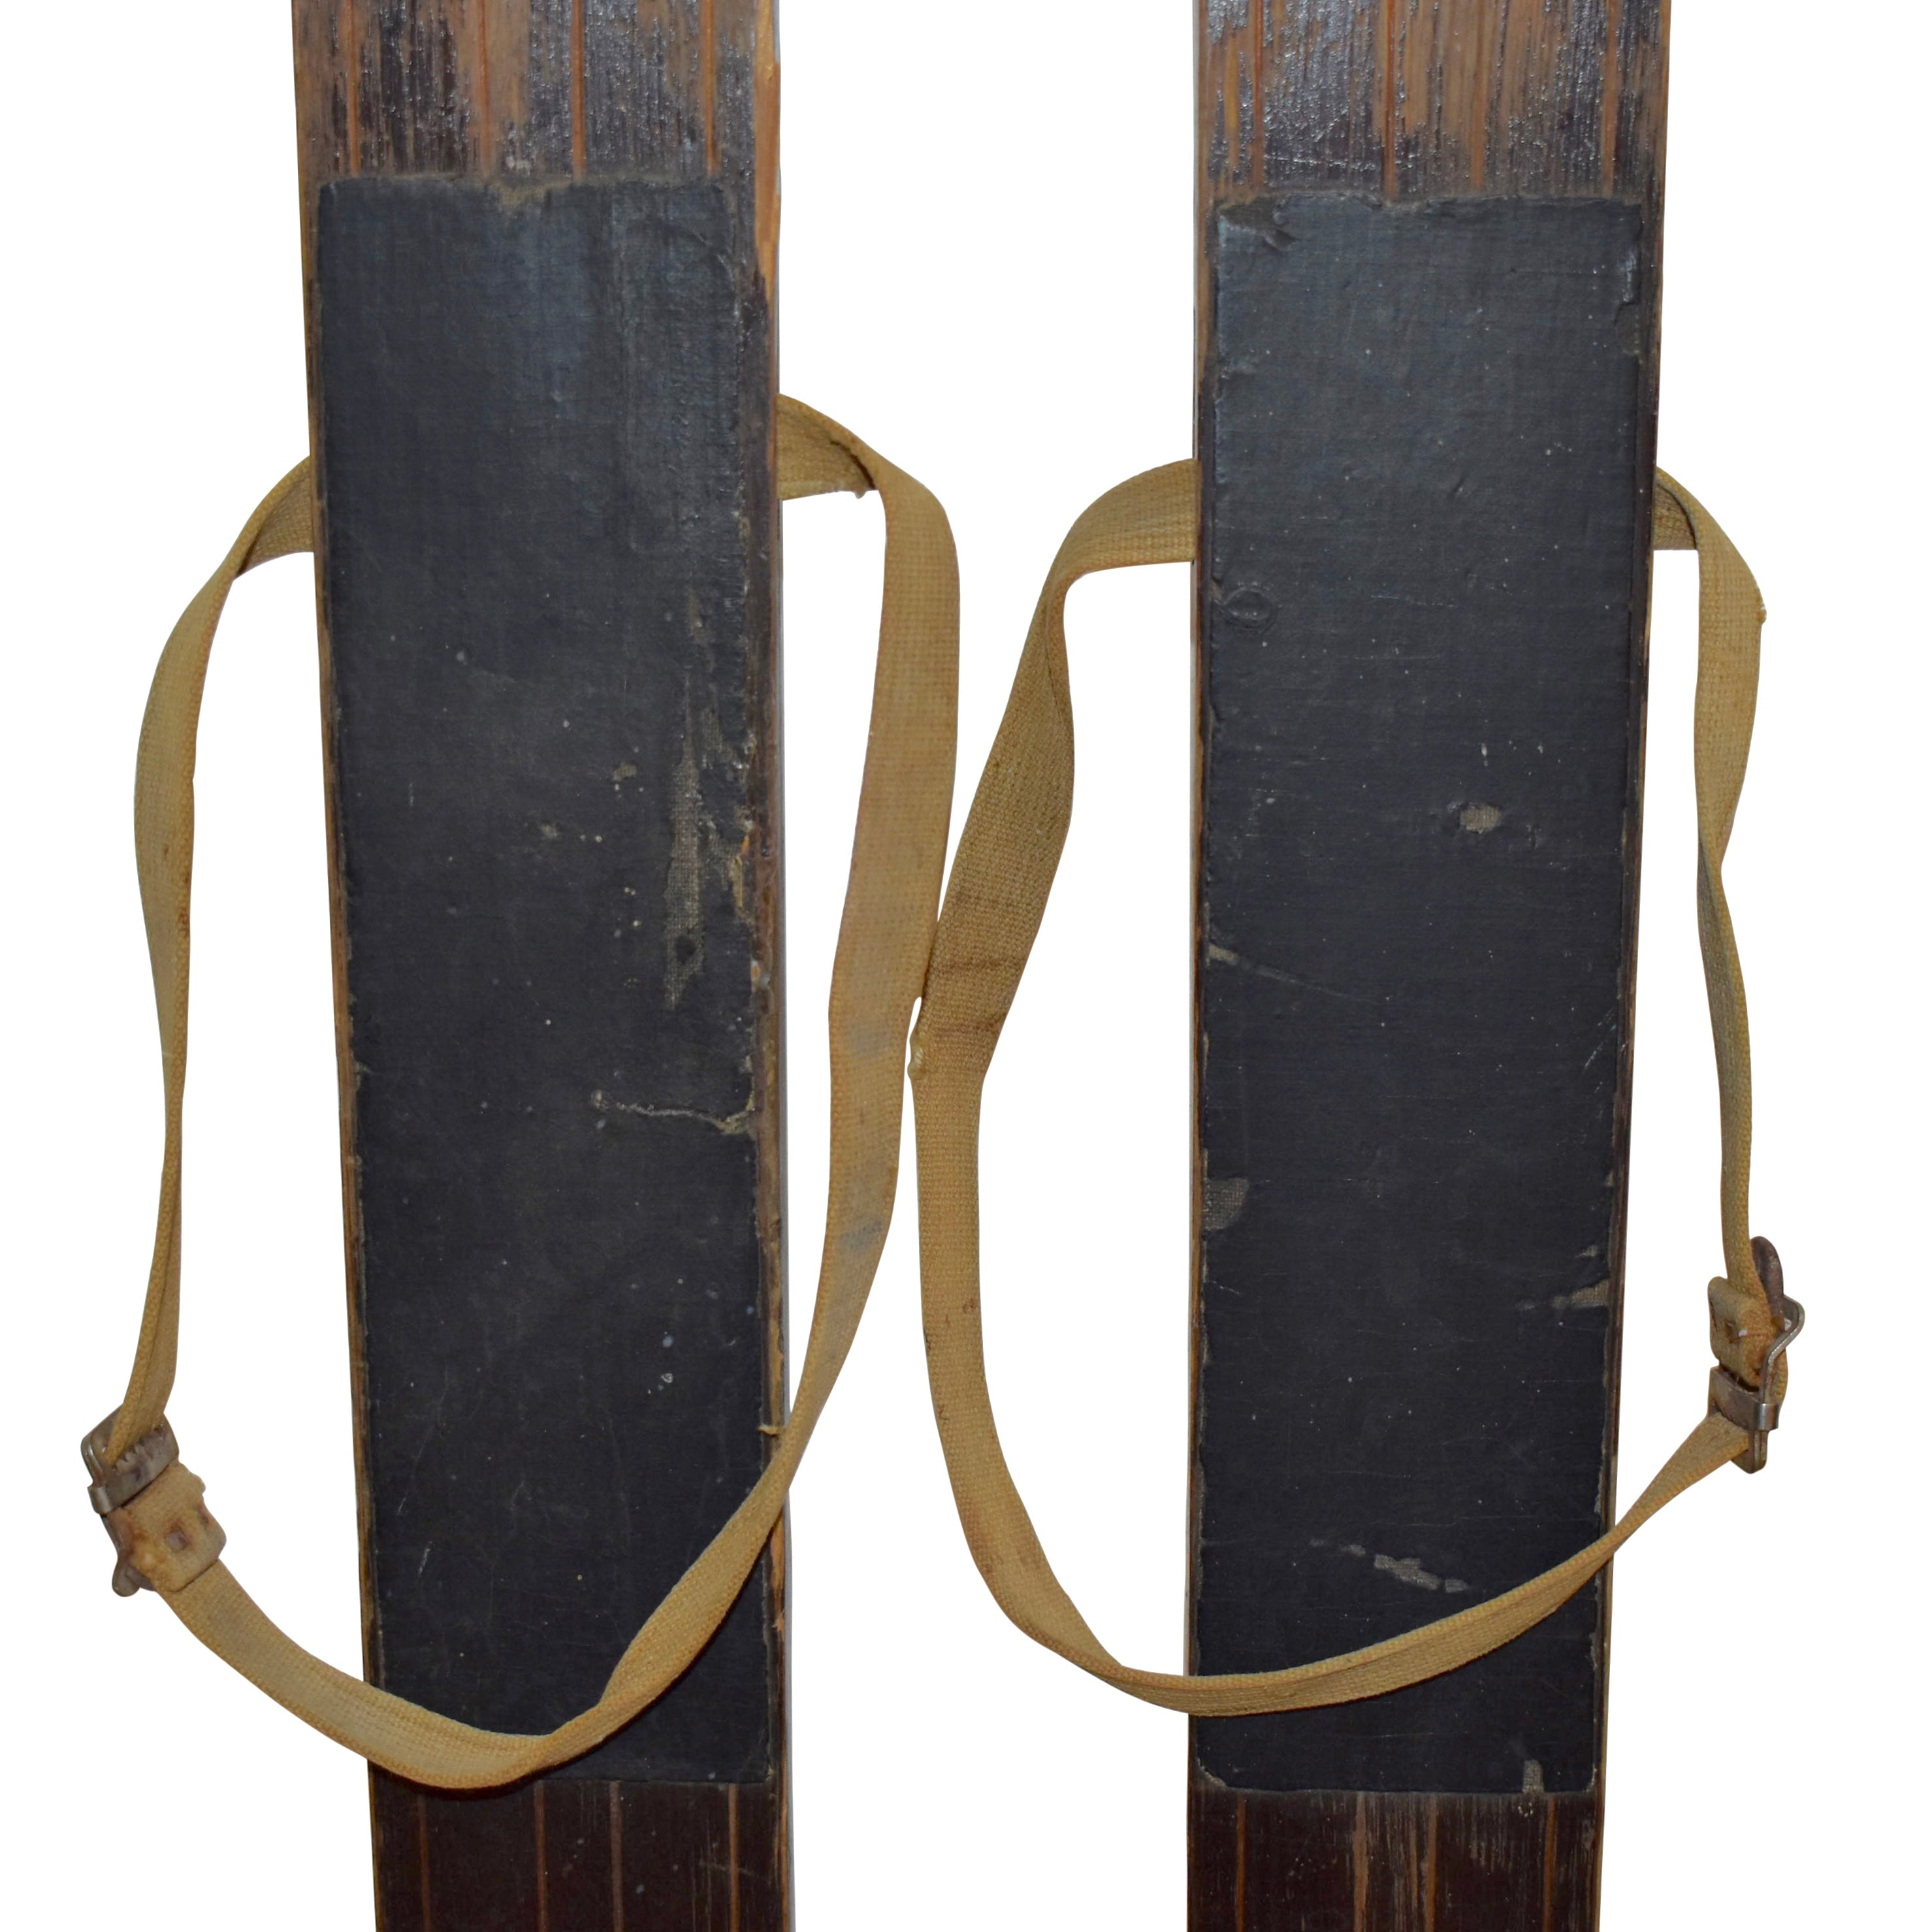 Northland Flat Top Skis